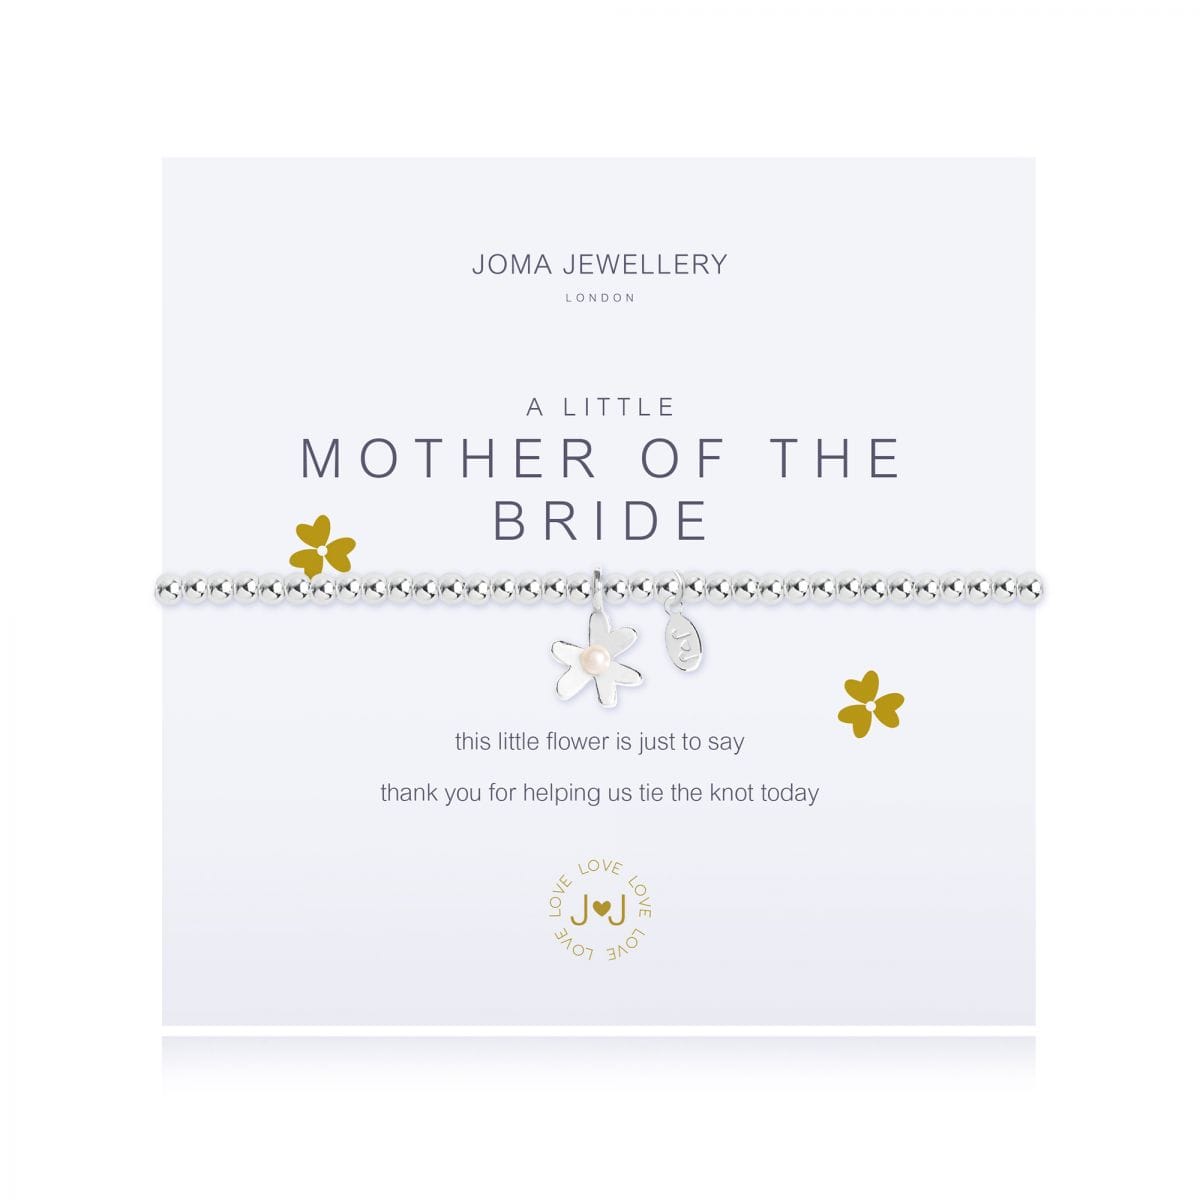 Joma Jewellery Bracelet Joma Jewellery Bracelet - a little Mother of the Bride